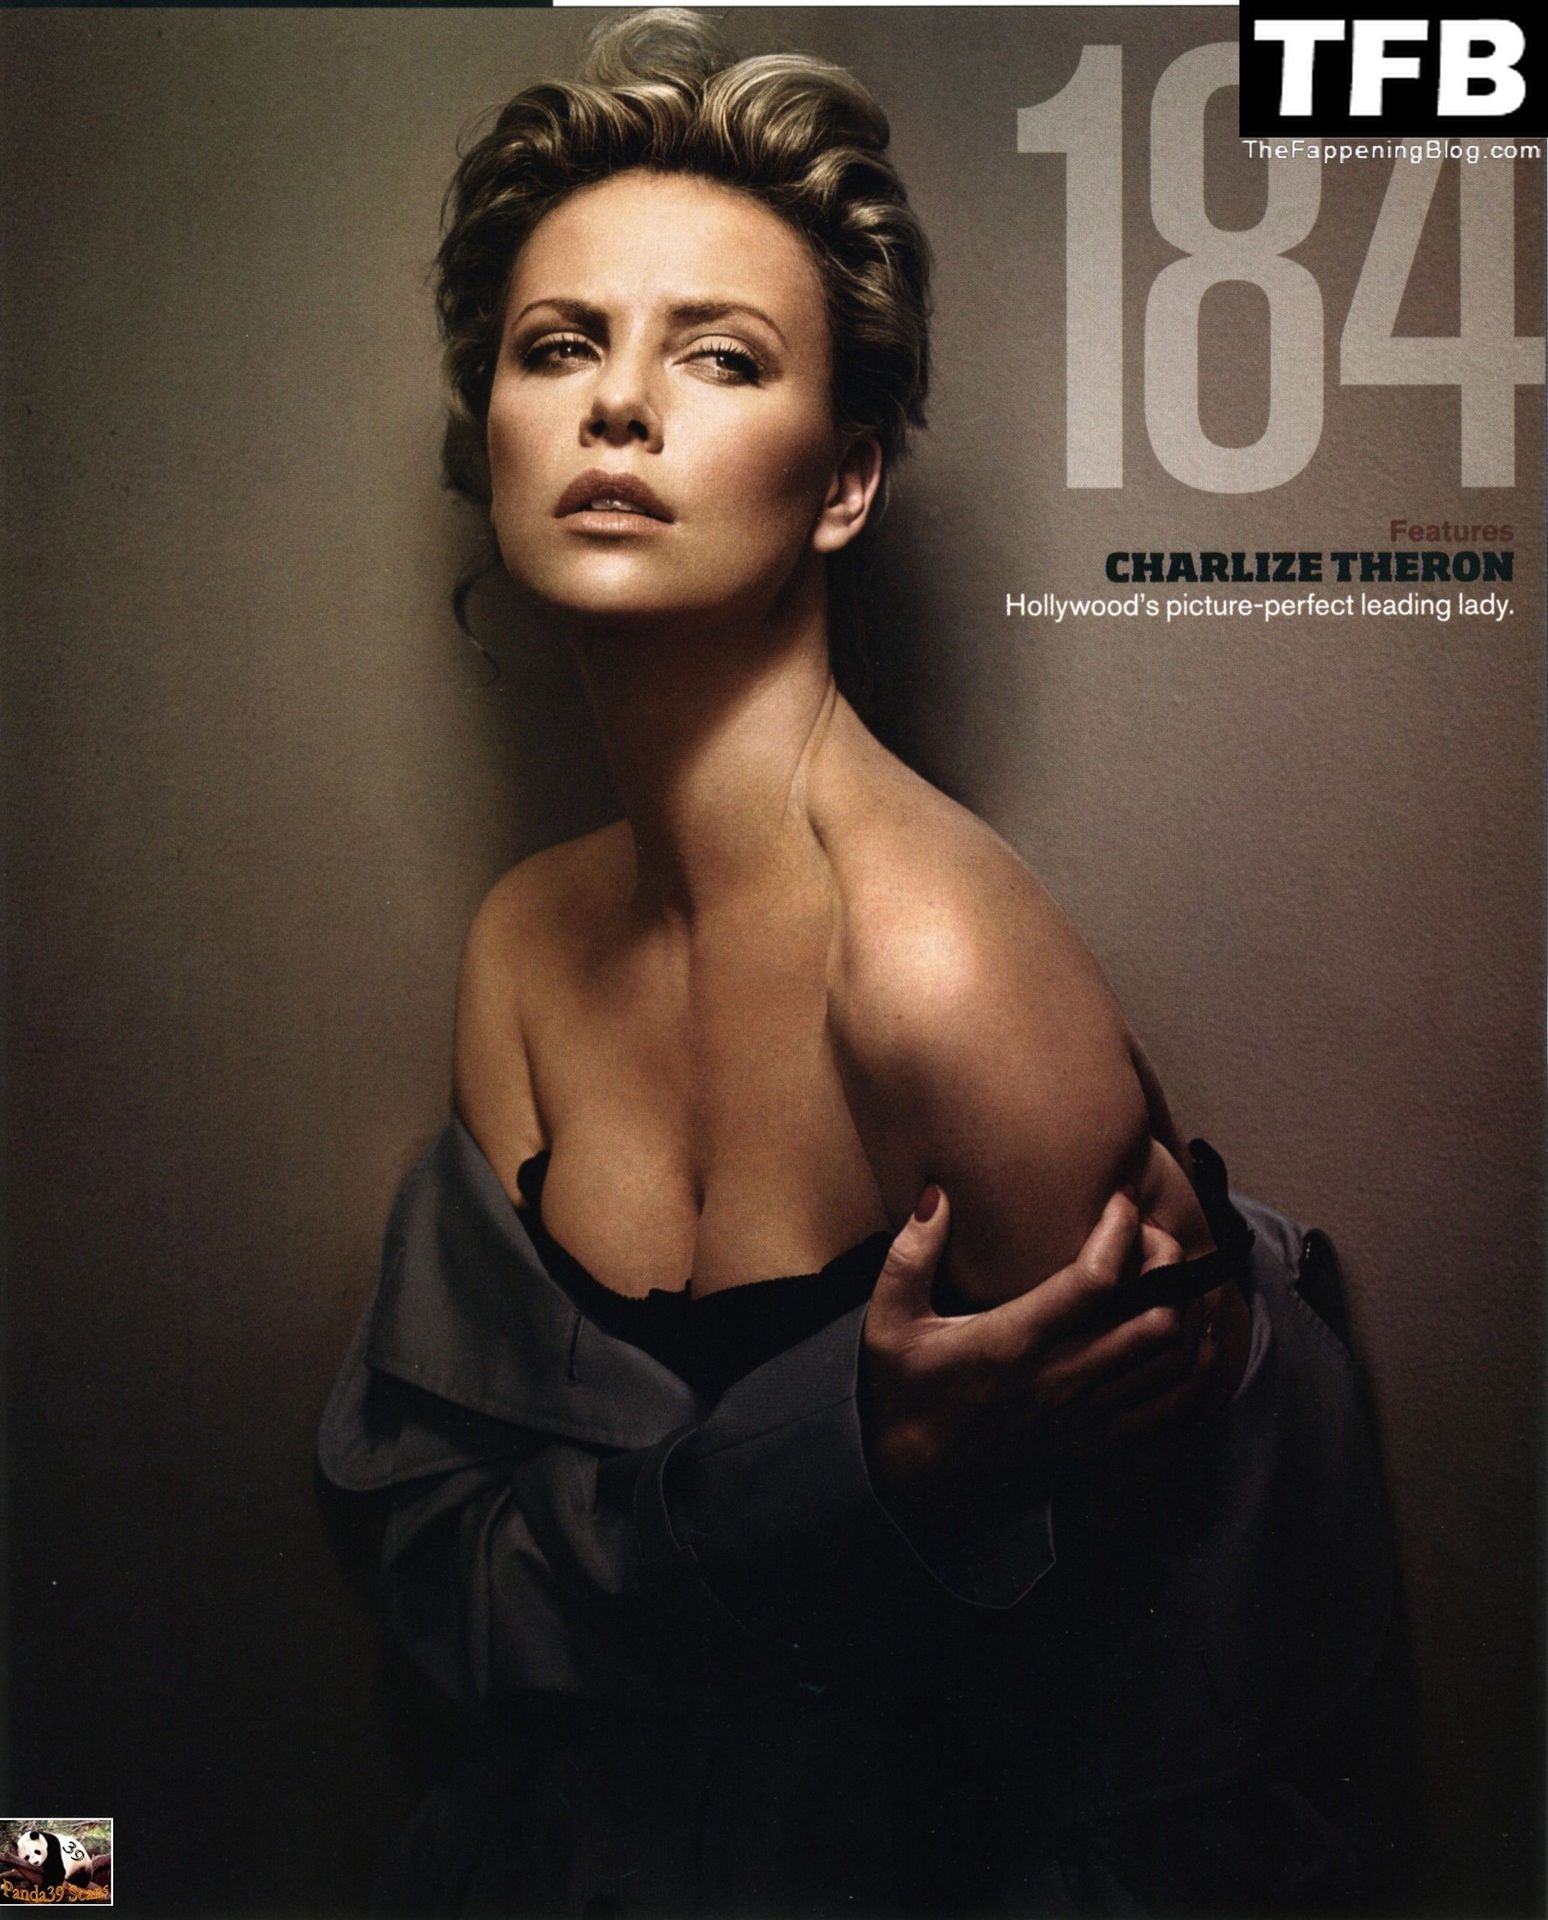 charlize-theron-collection-91-thefappeningblog.com_.jpg